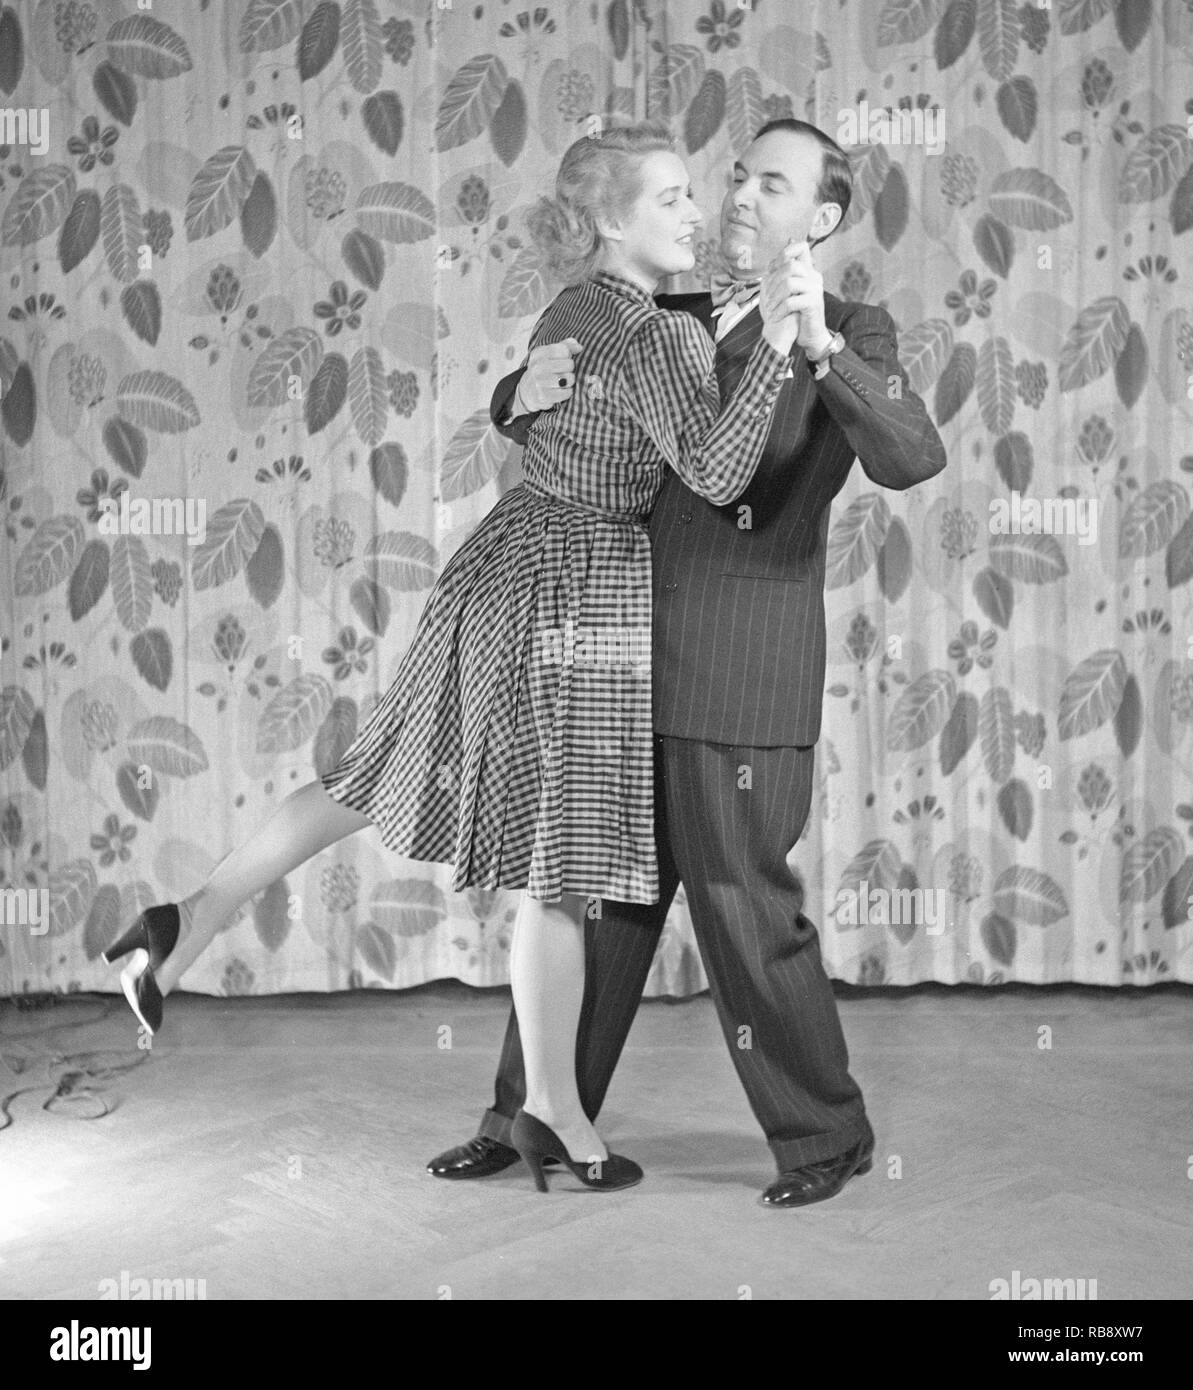 Learning to dance in the 1940s. A couple is dancing together. An instructiv image on how to position and move to the music, although which dance they are dancing is not known. Sweden 1946. Photo: Kristoffersson ref Y57-3 Stock Photo